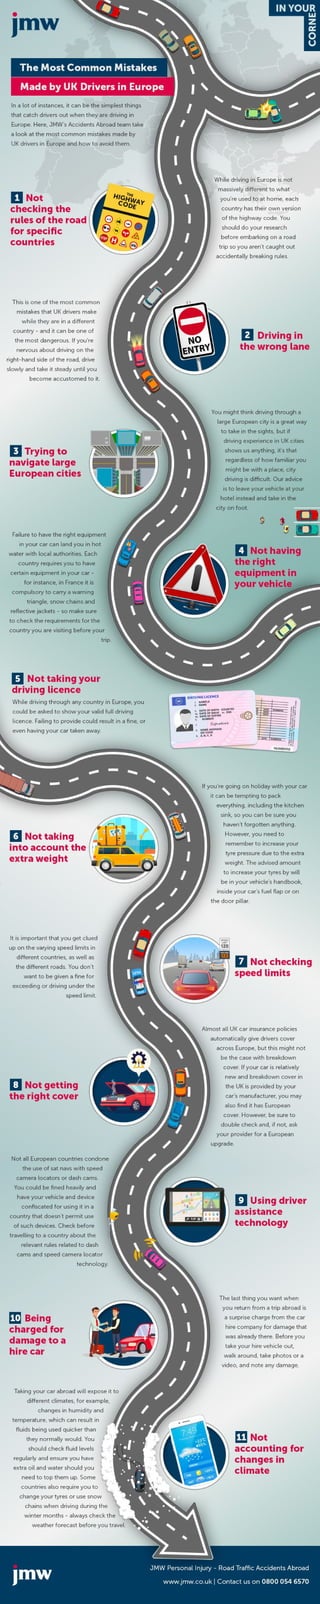 The Most Common Mistakes Made By UK Drivers in Europe